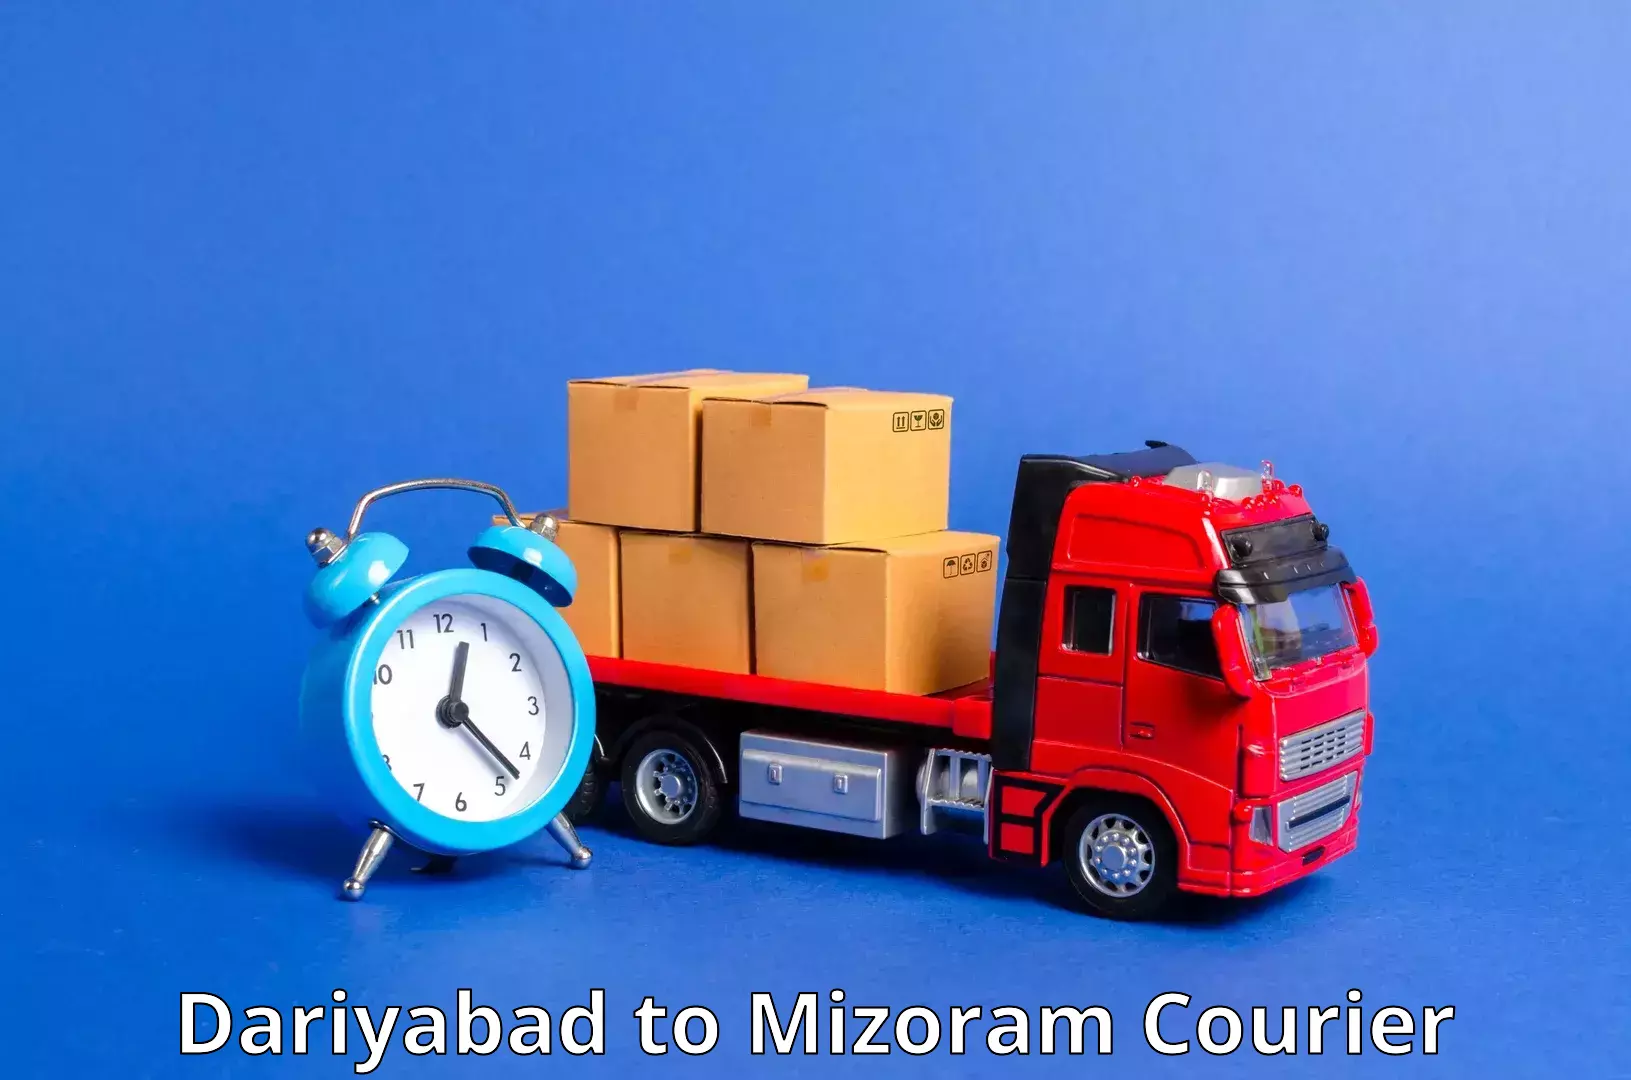 Express package services in Dariyabad to Darlawn